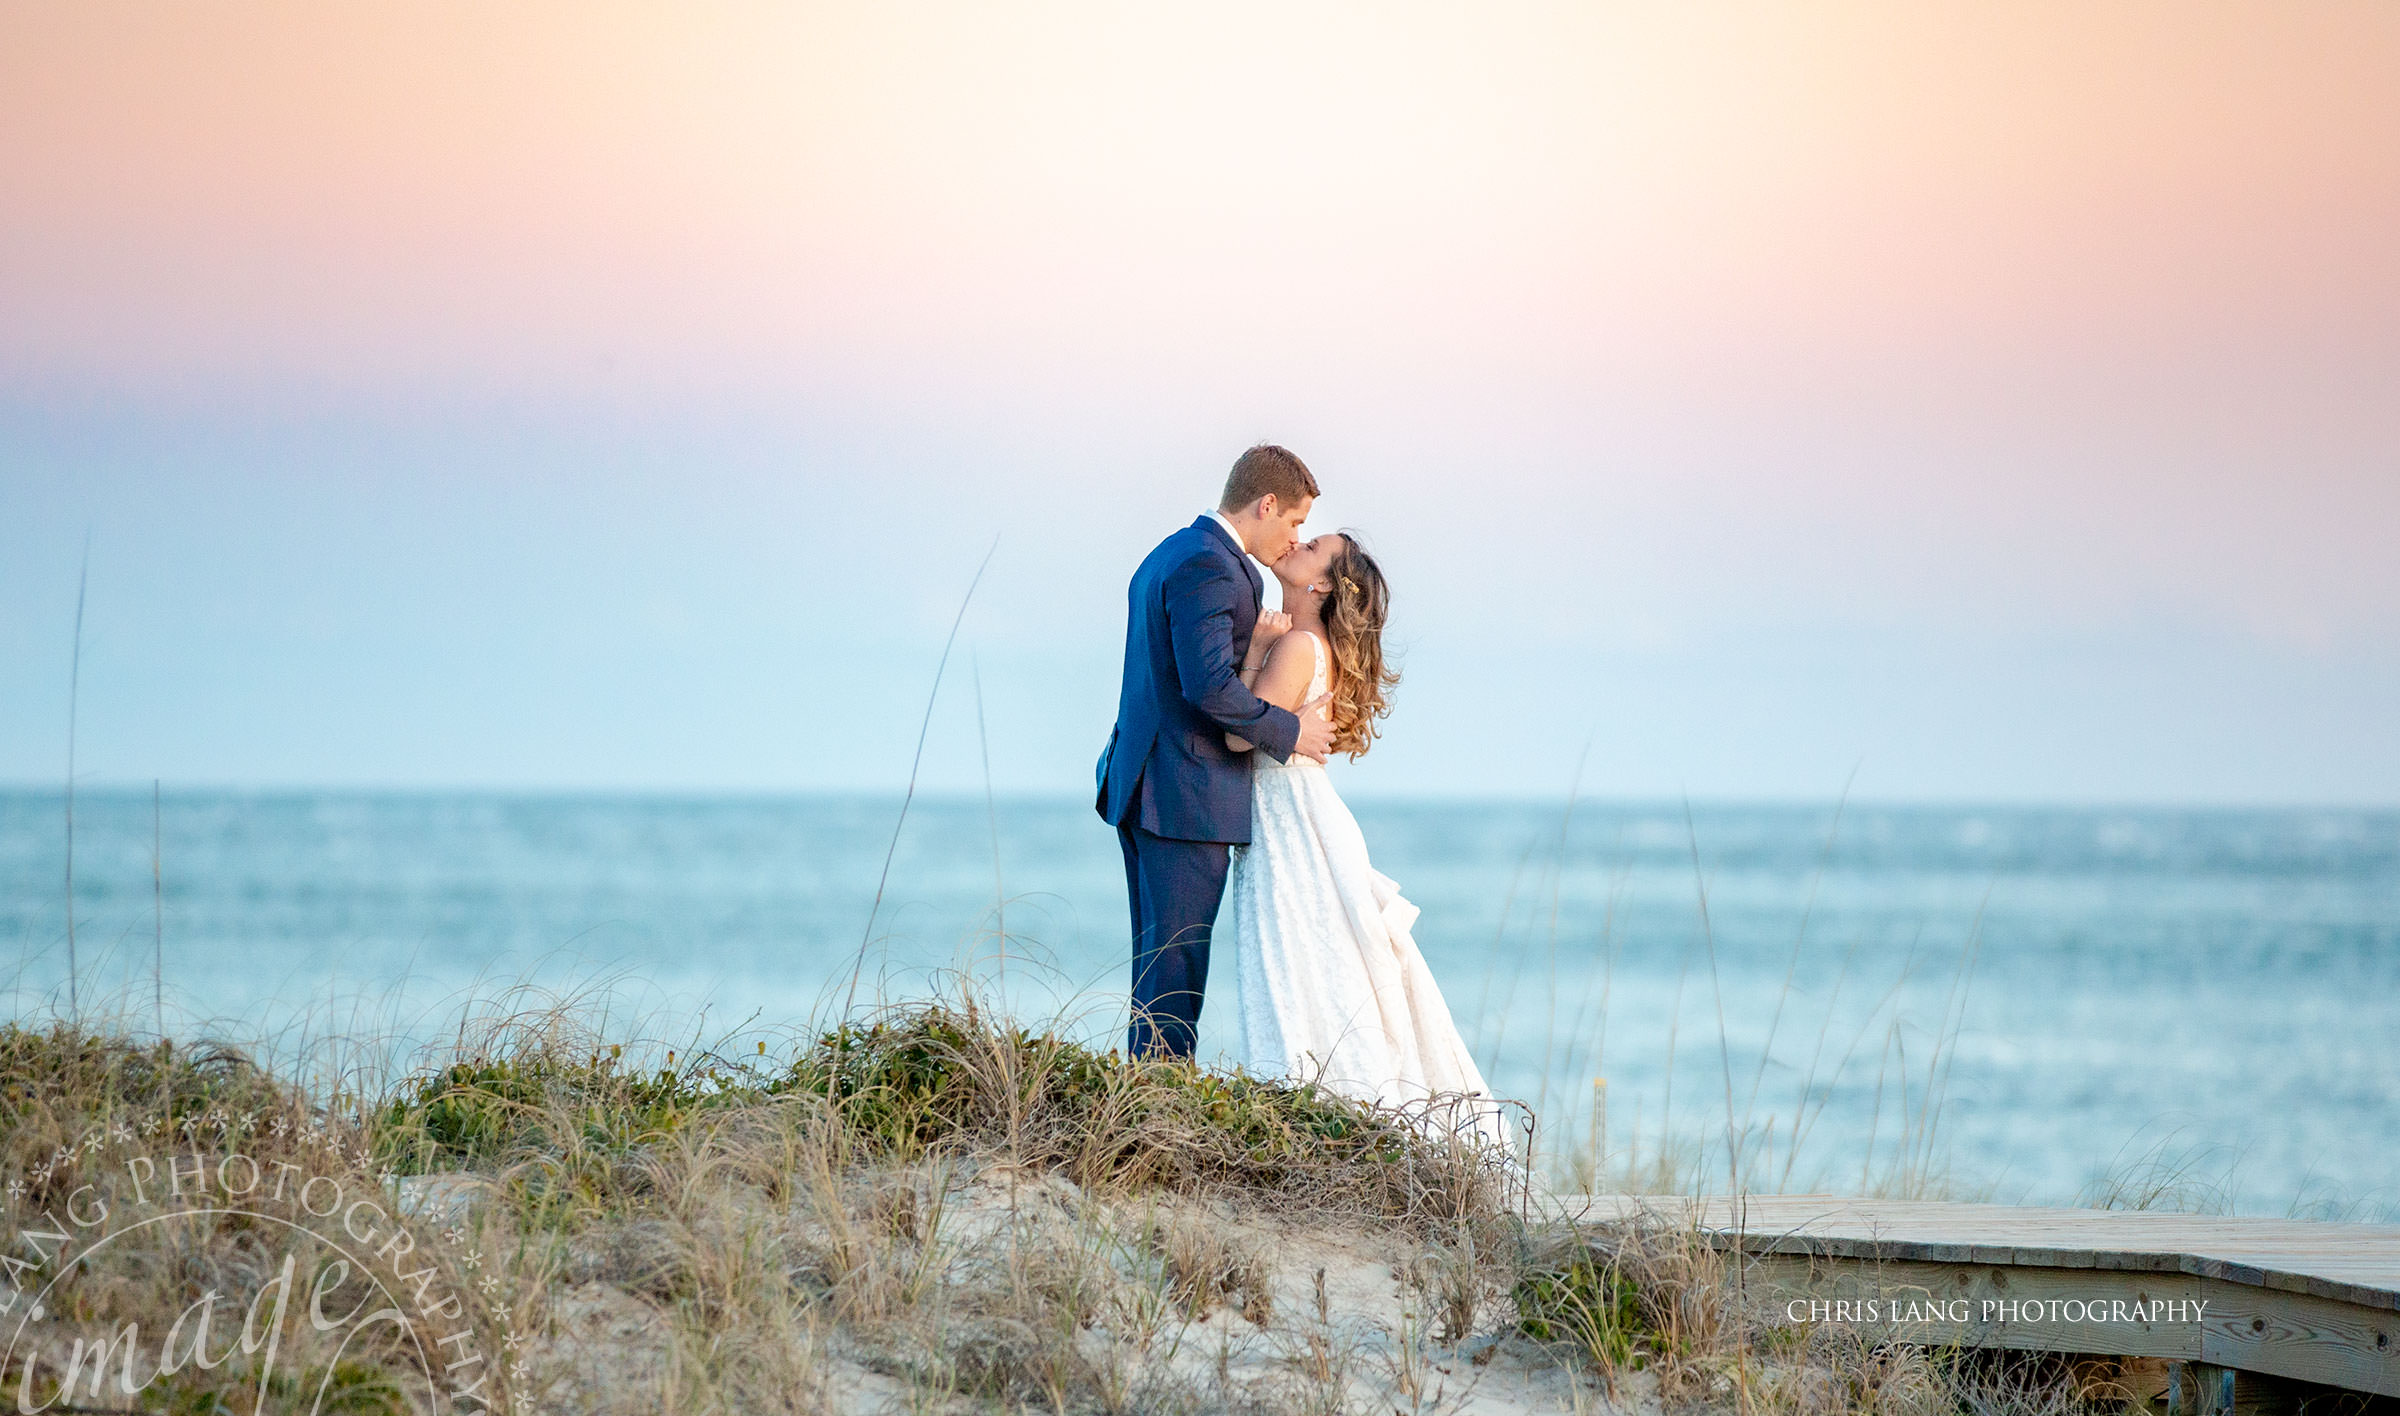 Bald Head Island Wedding picture - bride and groom on the beach at sunset  - twilight wedding picture -- Shoald Club -  Photo inspiration - Atlantic Ocean - Chris Lang Photography